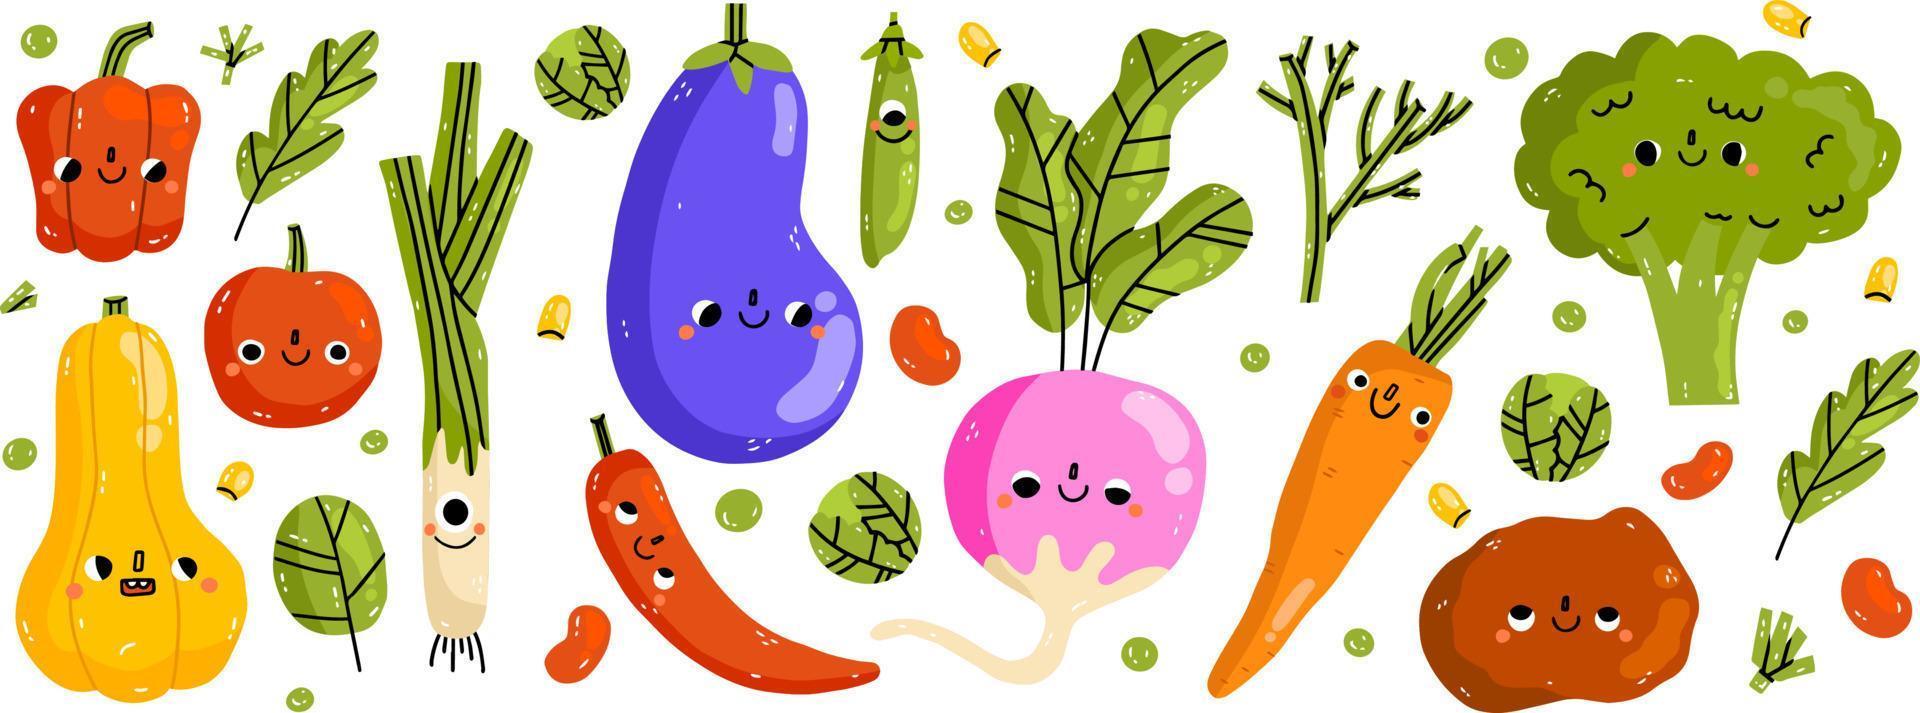 Cute vegetable characters with funny kawaii faces. Happy smiling ...